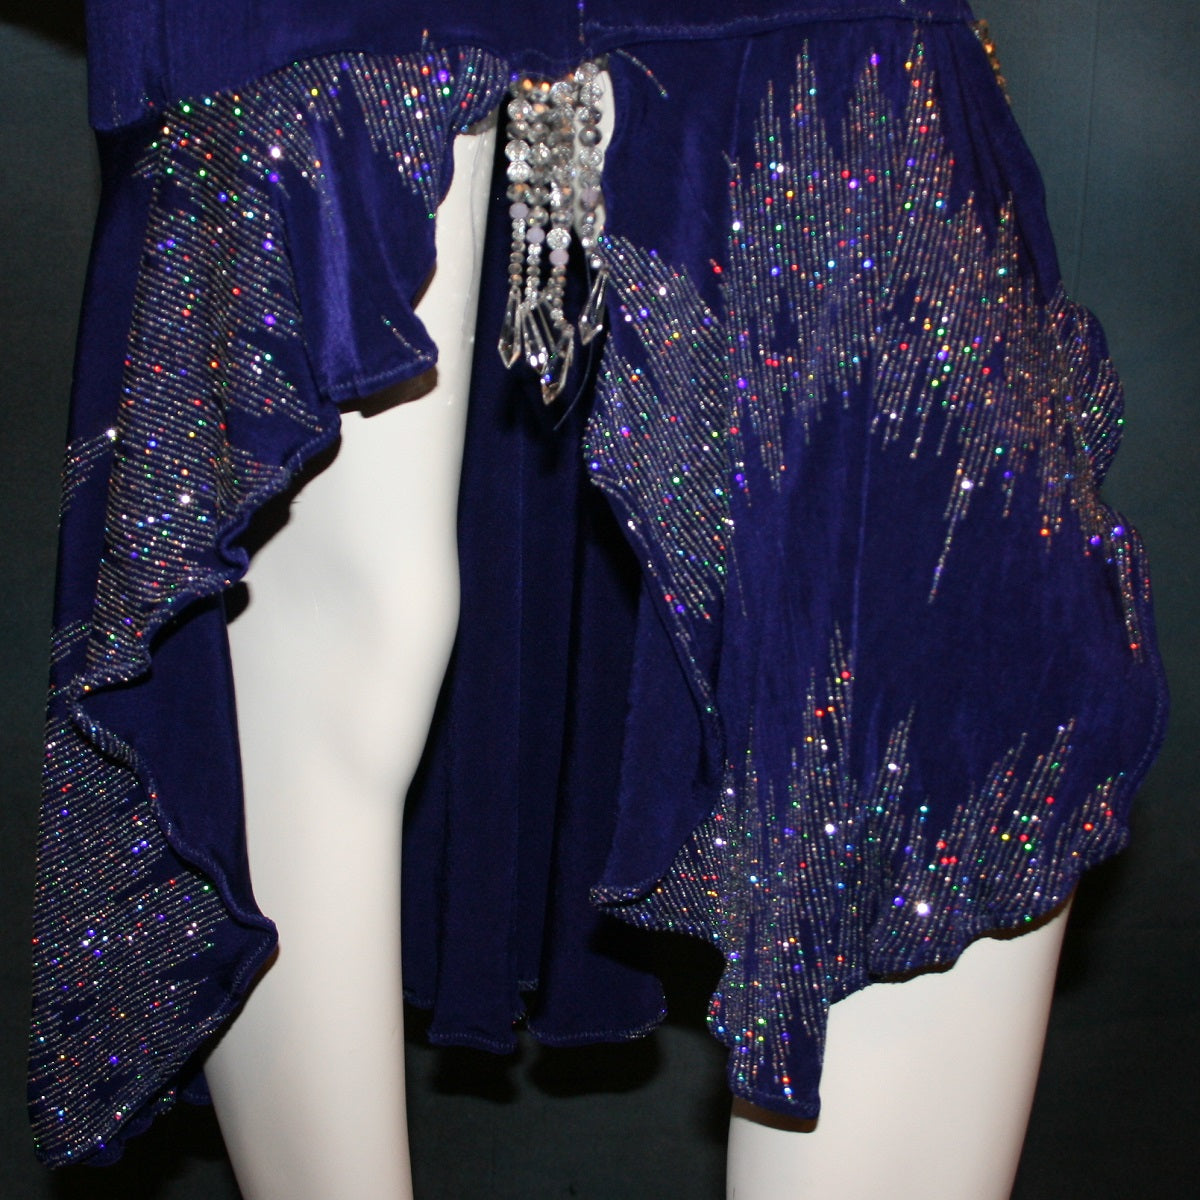 close up details of Deep royal purple Latin/rhythm/tango dress created in deep royal purple glitter slinky with an awesome electrifying glitter pattern features long flaired sleeves, lattice strap detailing up the low back & a touch of hand beading in skirting slits.